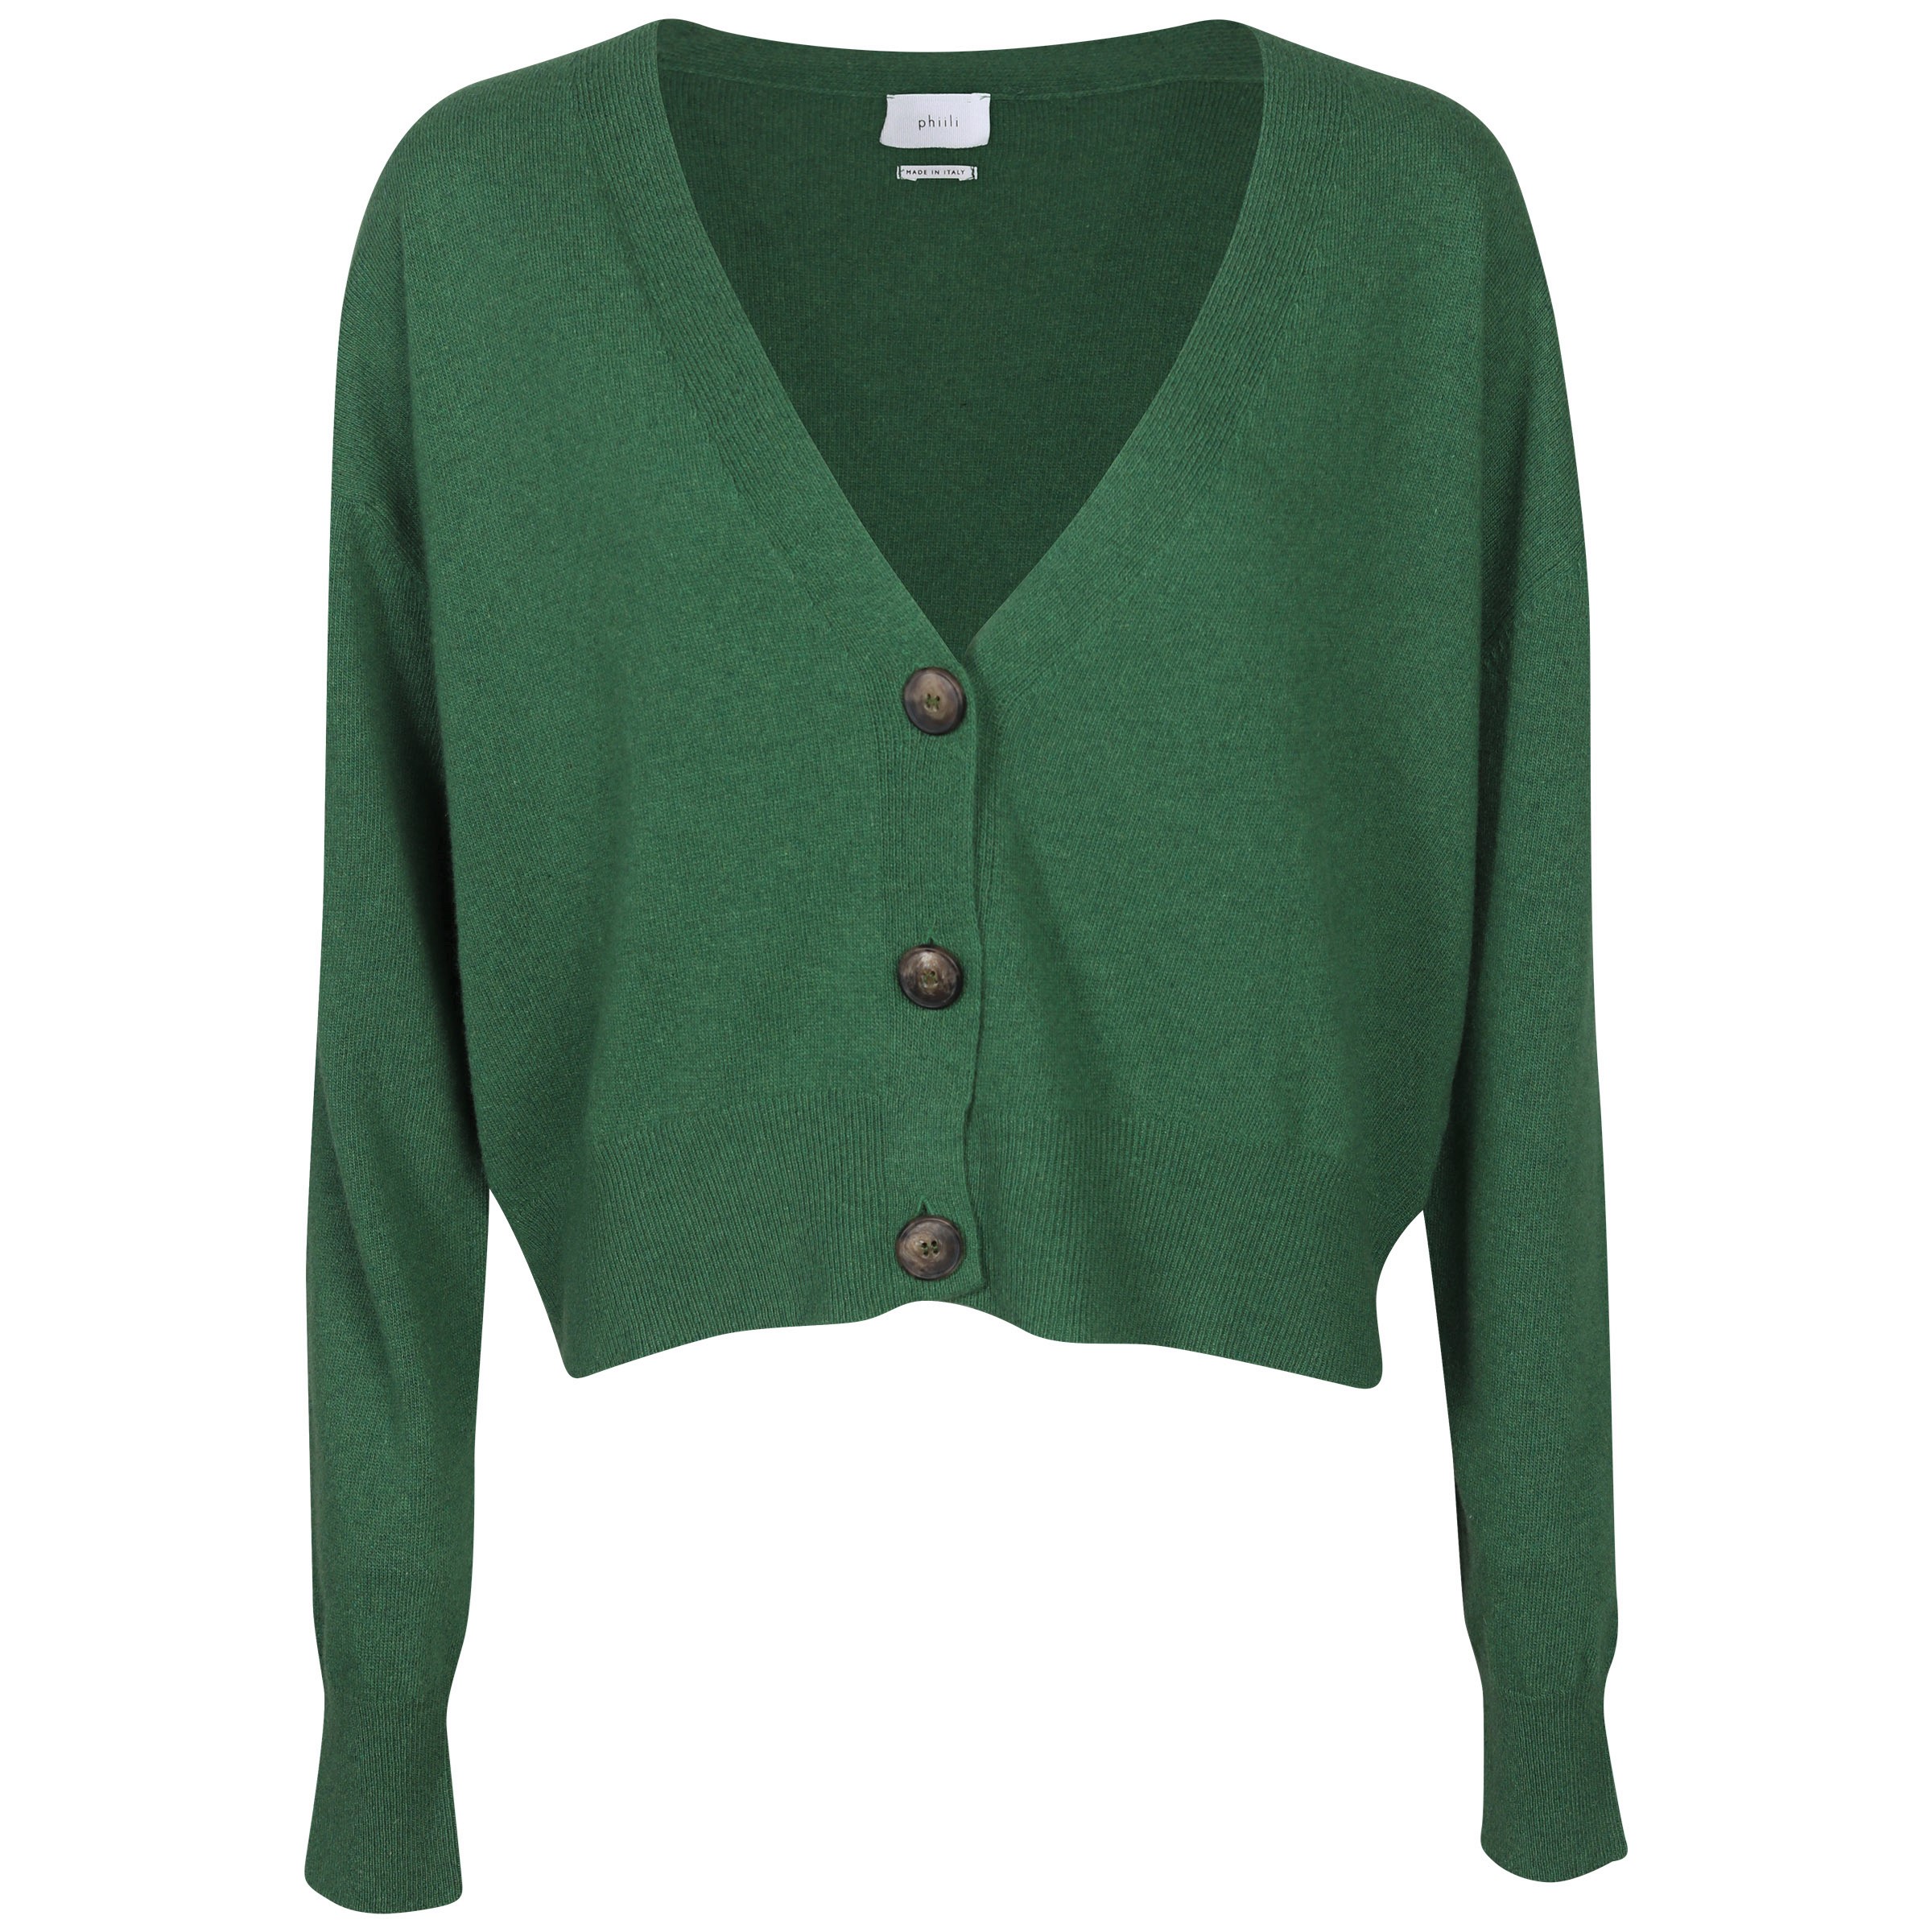 Phiili Recycled Cashmere Cardigan in Green